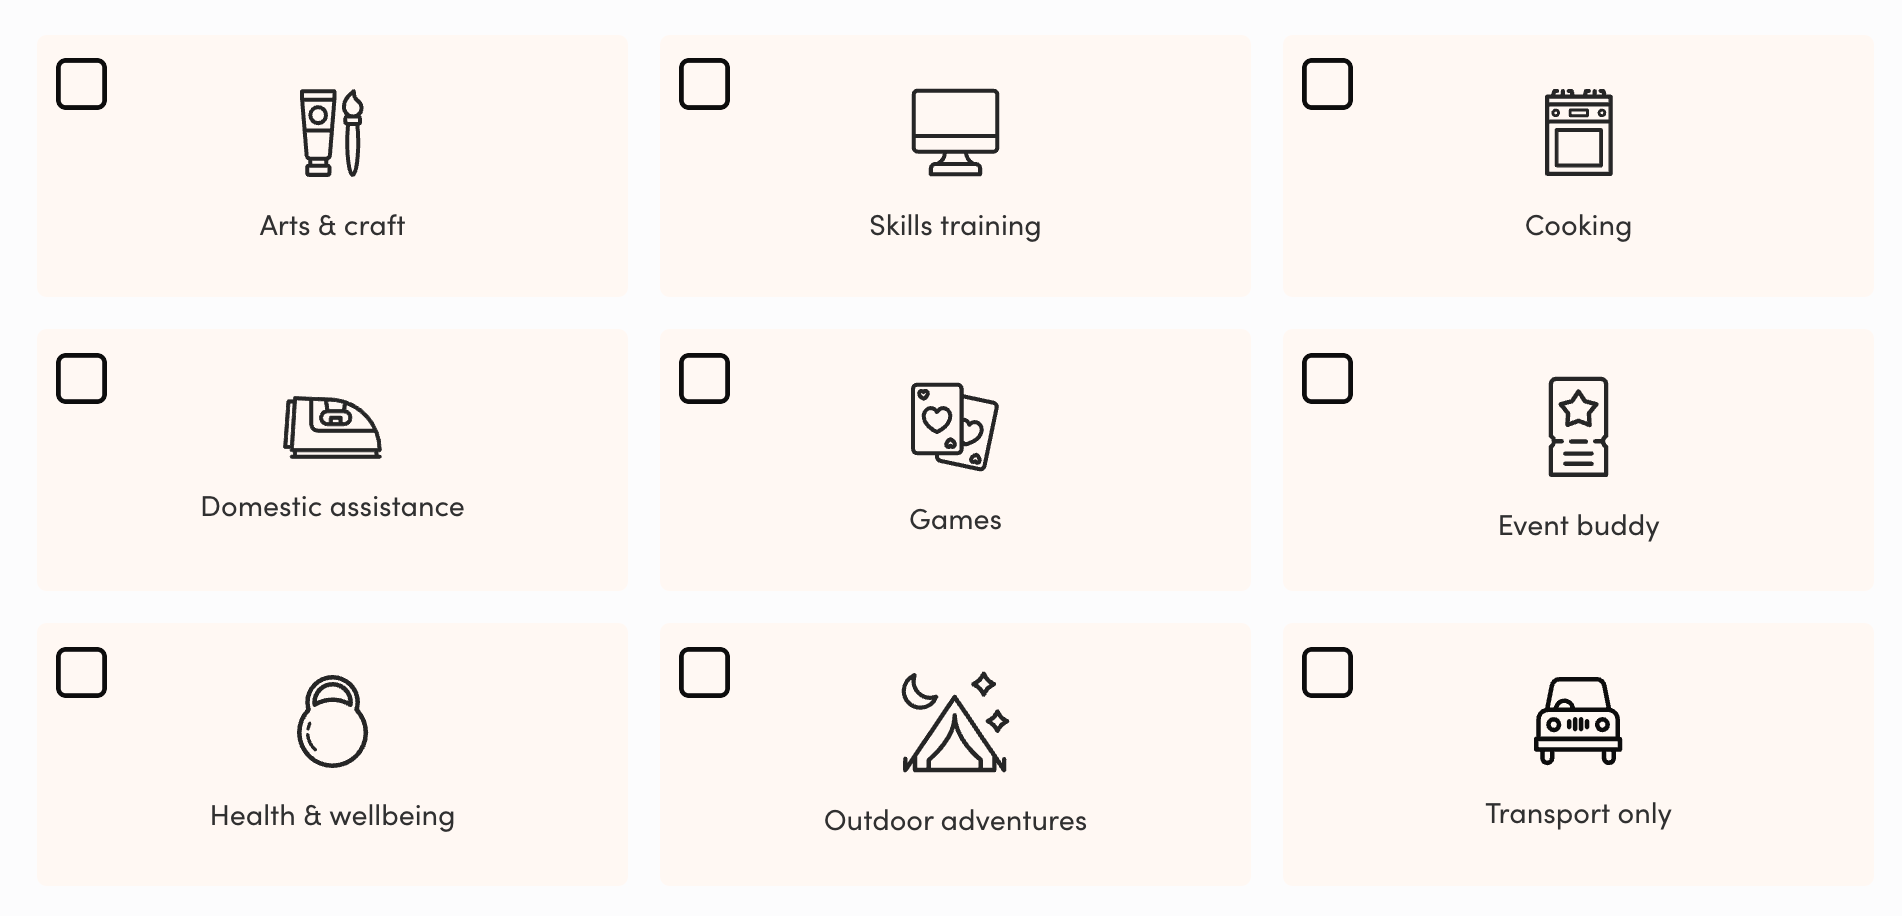 9 activity categories with tick boxes